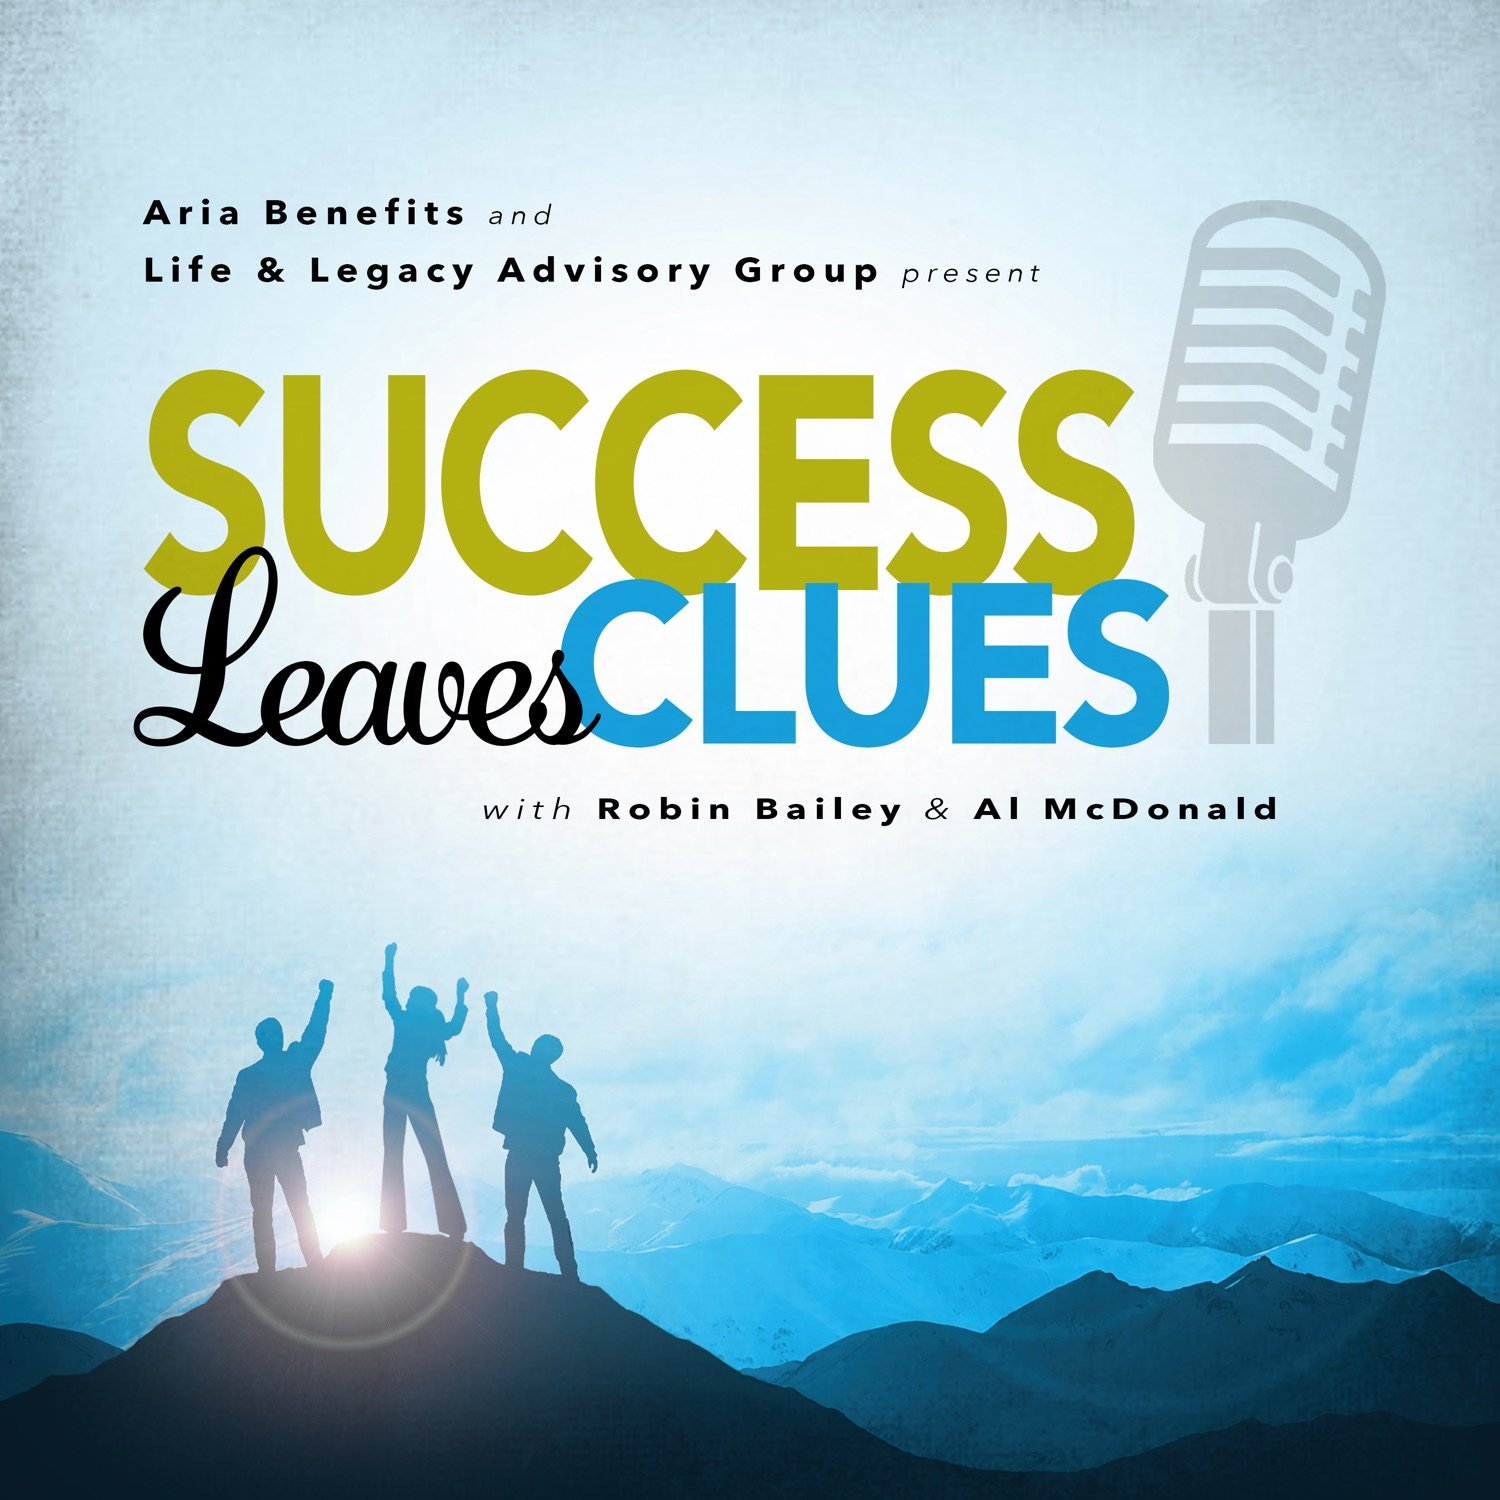 Success Leaves Clues with Robin Bailey and Al McDonald